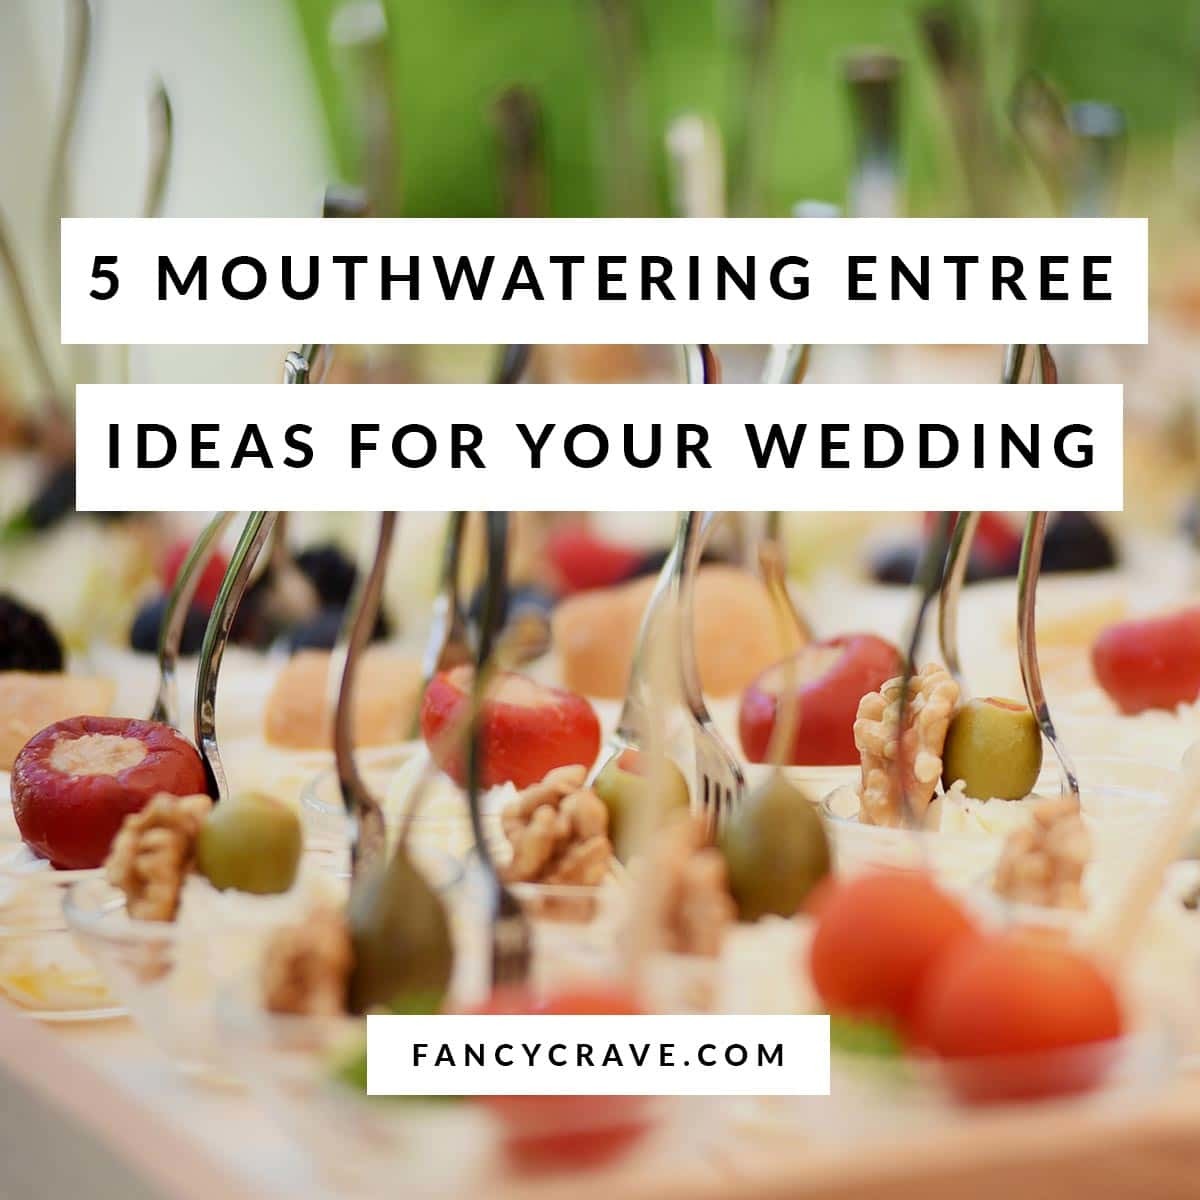 Mouthwatering Entree Ideas for Your Wedding